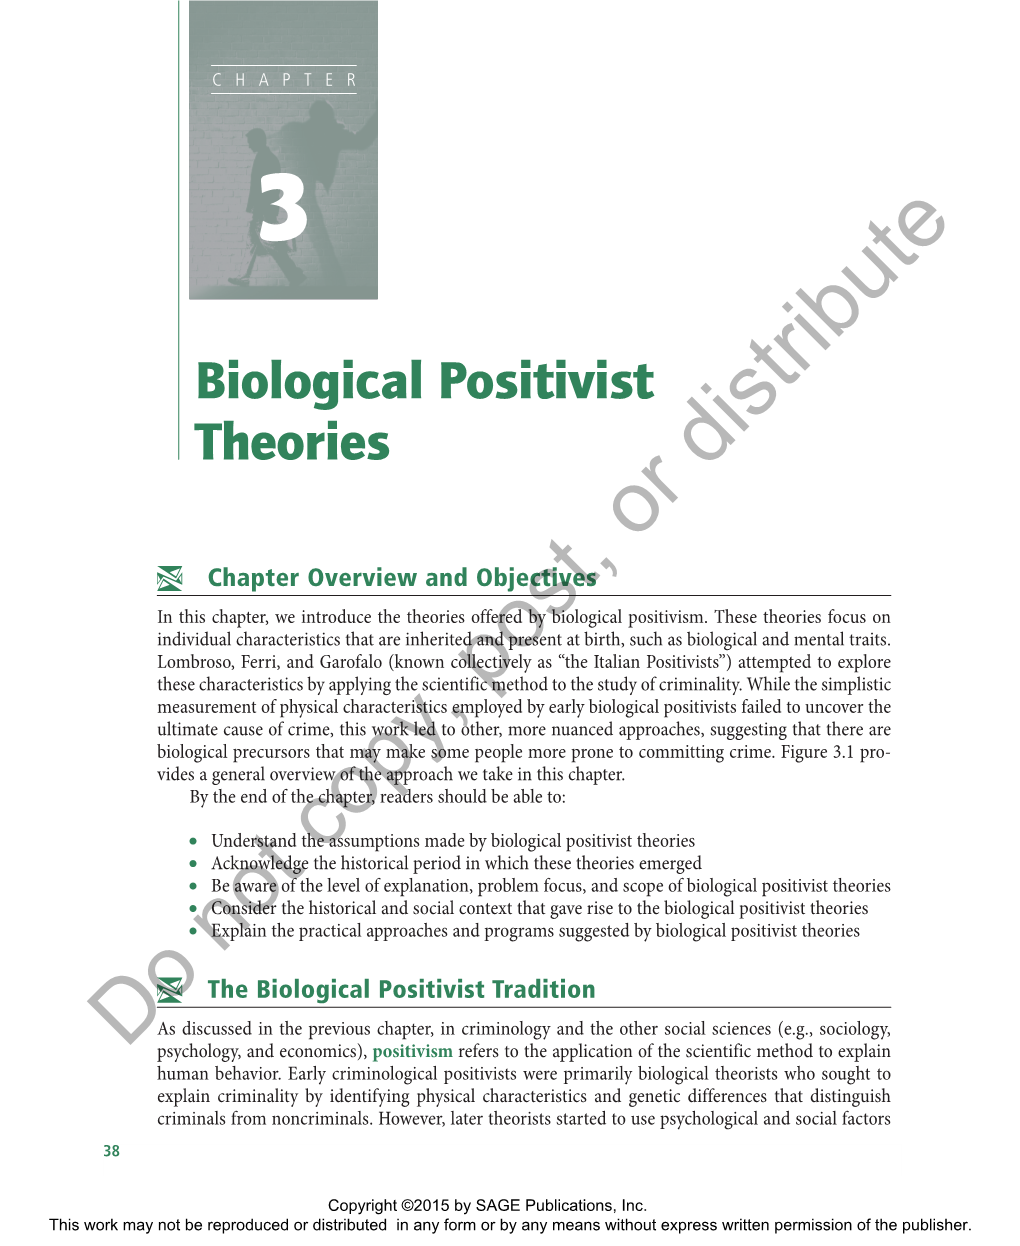 Biological Positivist Theories Distribute Or Yychapter Overview and Objectives in This Chapter, We Introduce the Theories Offered by Biological Positivism